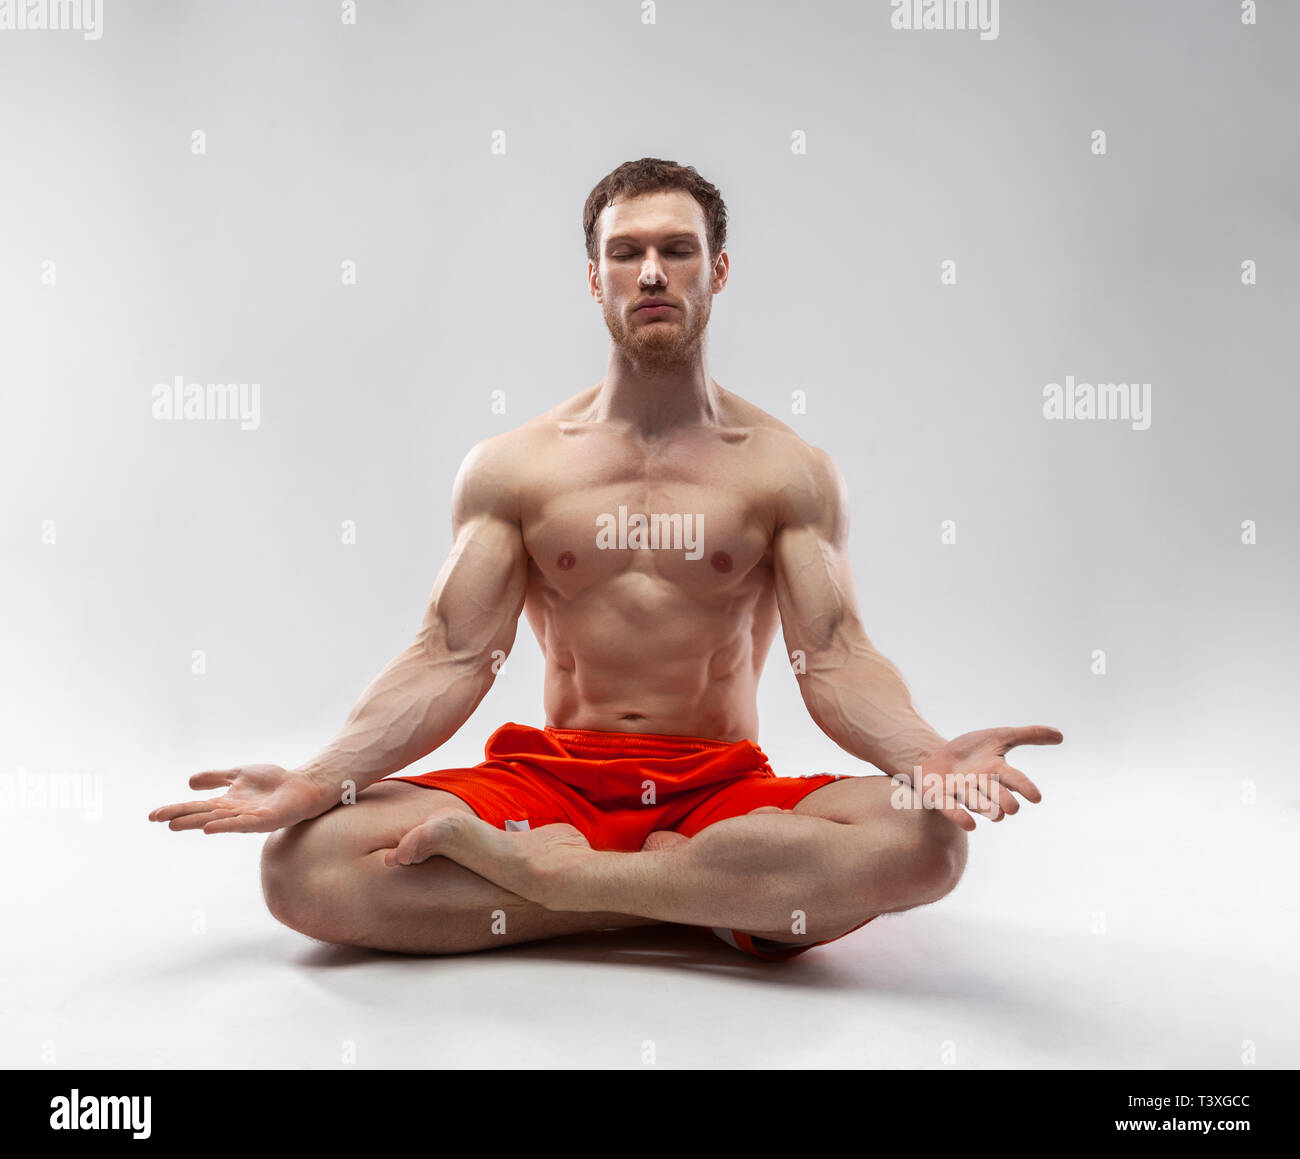 A man with his eyes closed and muscular body sitting in the lotus position Stock Photo